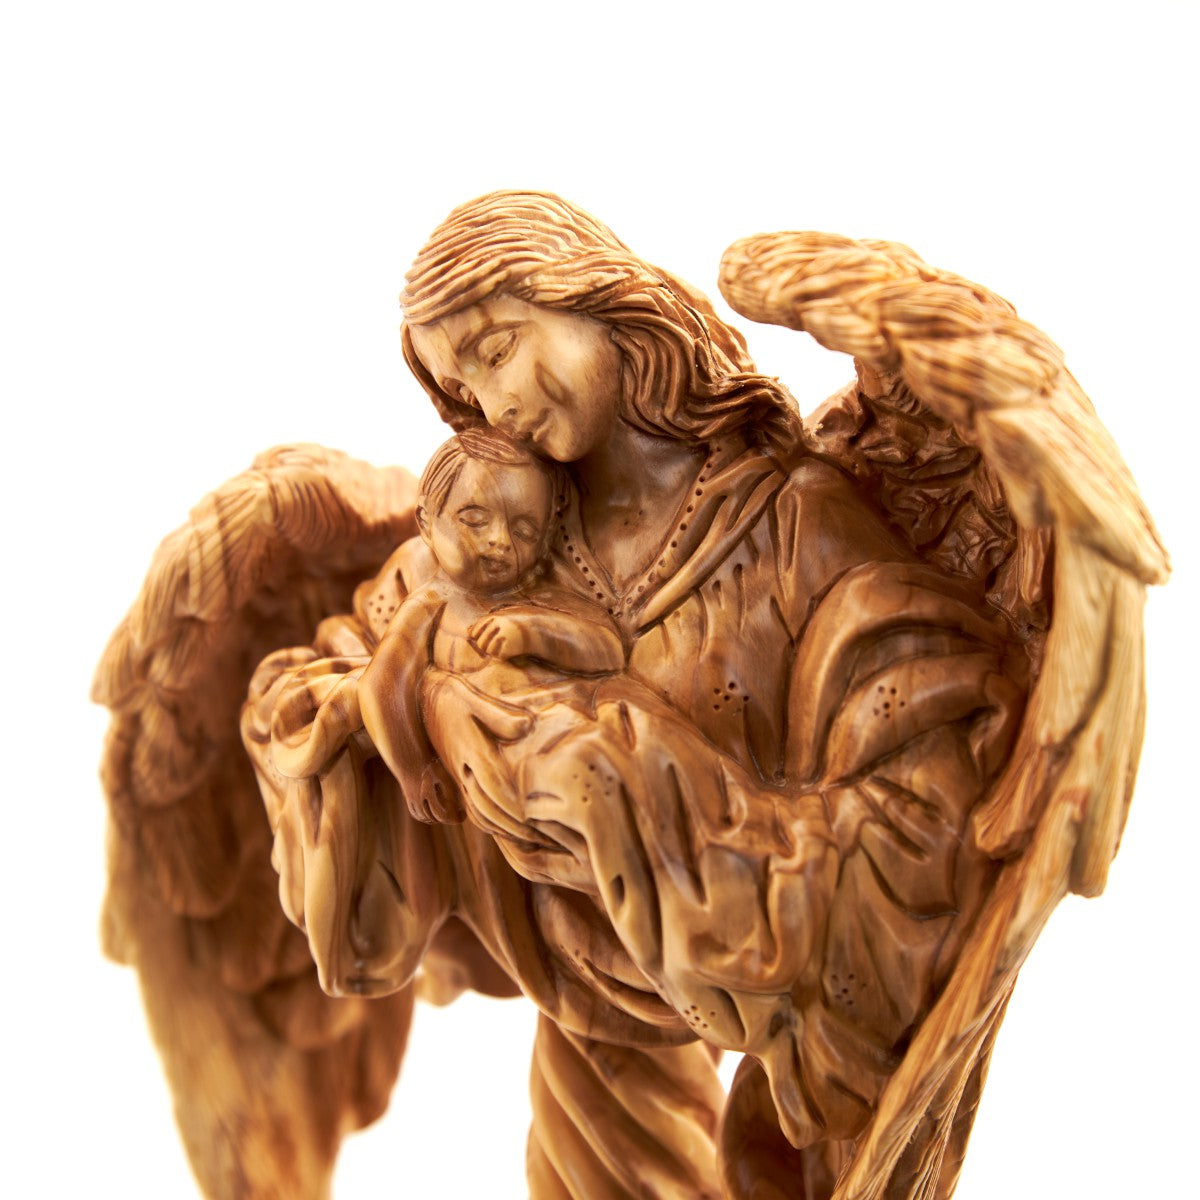 Jesus Holding Baby with Angel Wings Carvings, 11.8"